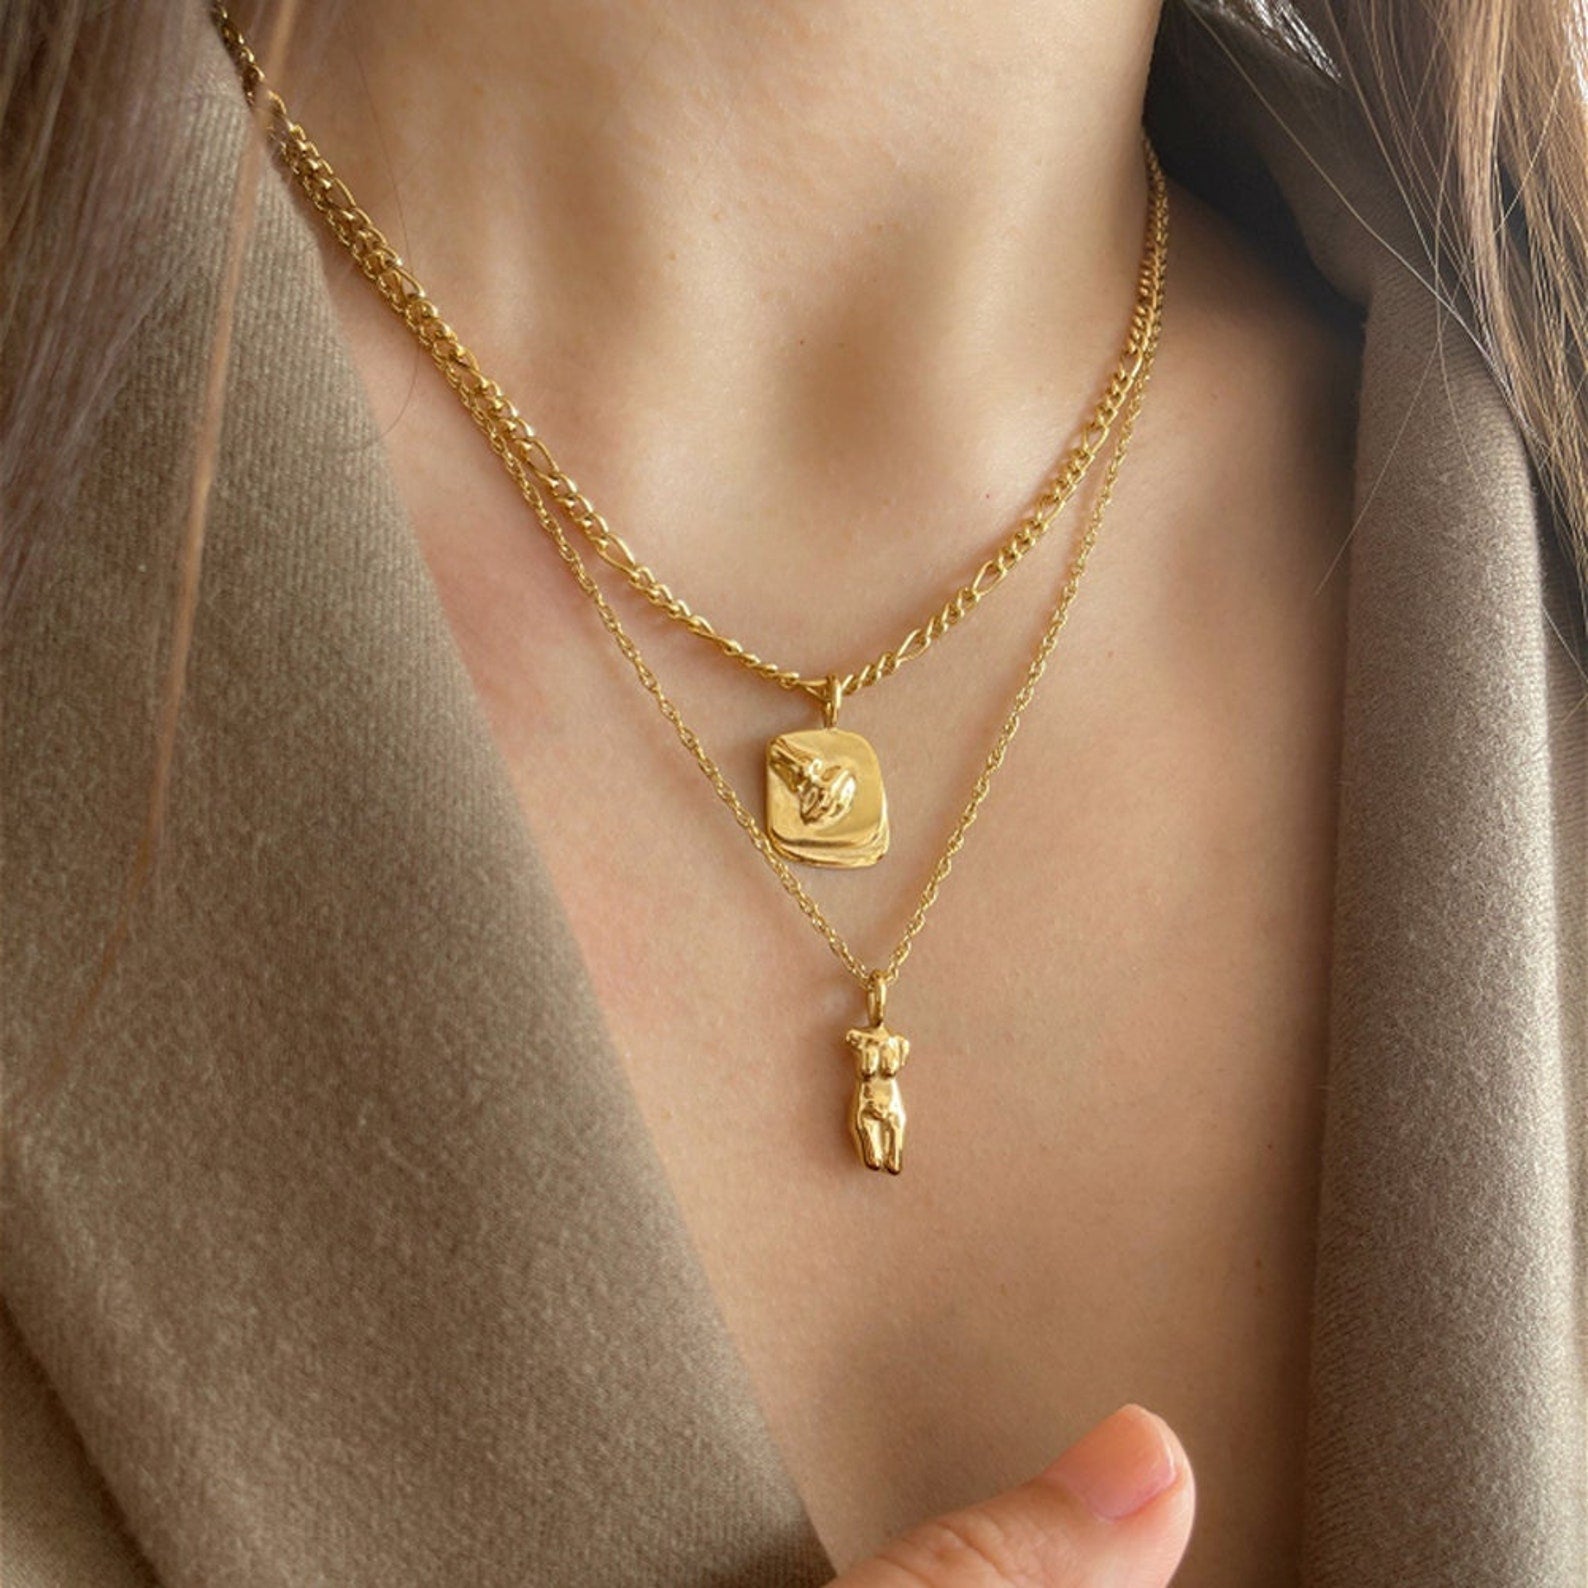 3D Three-Dimensional Half Face Necklace